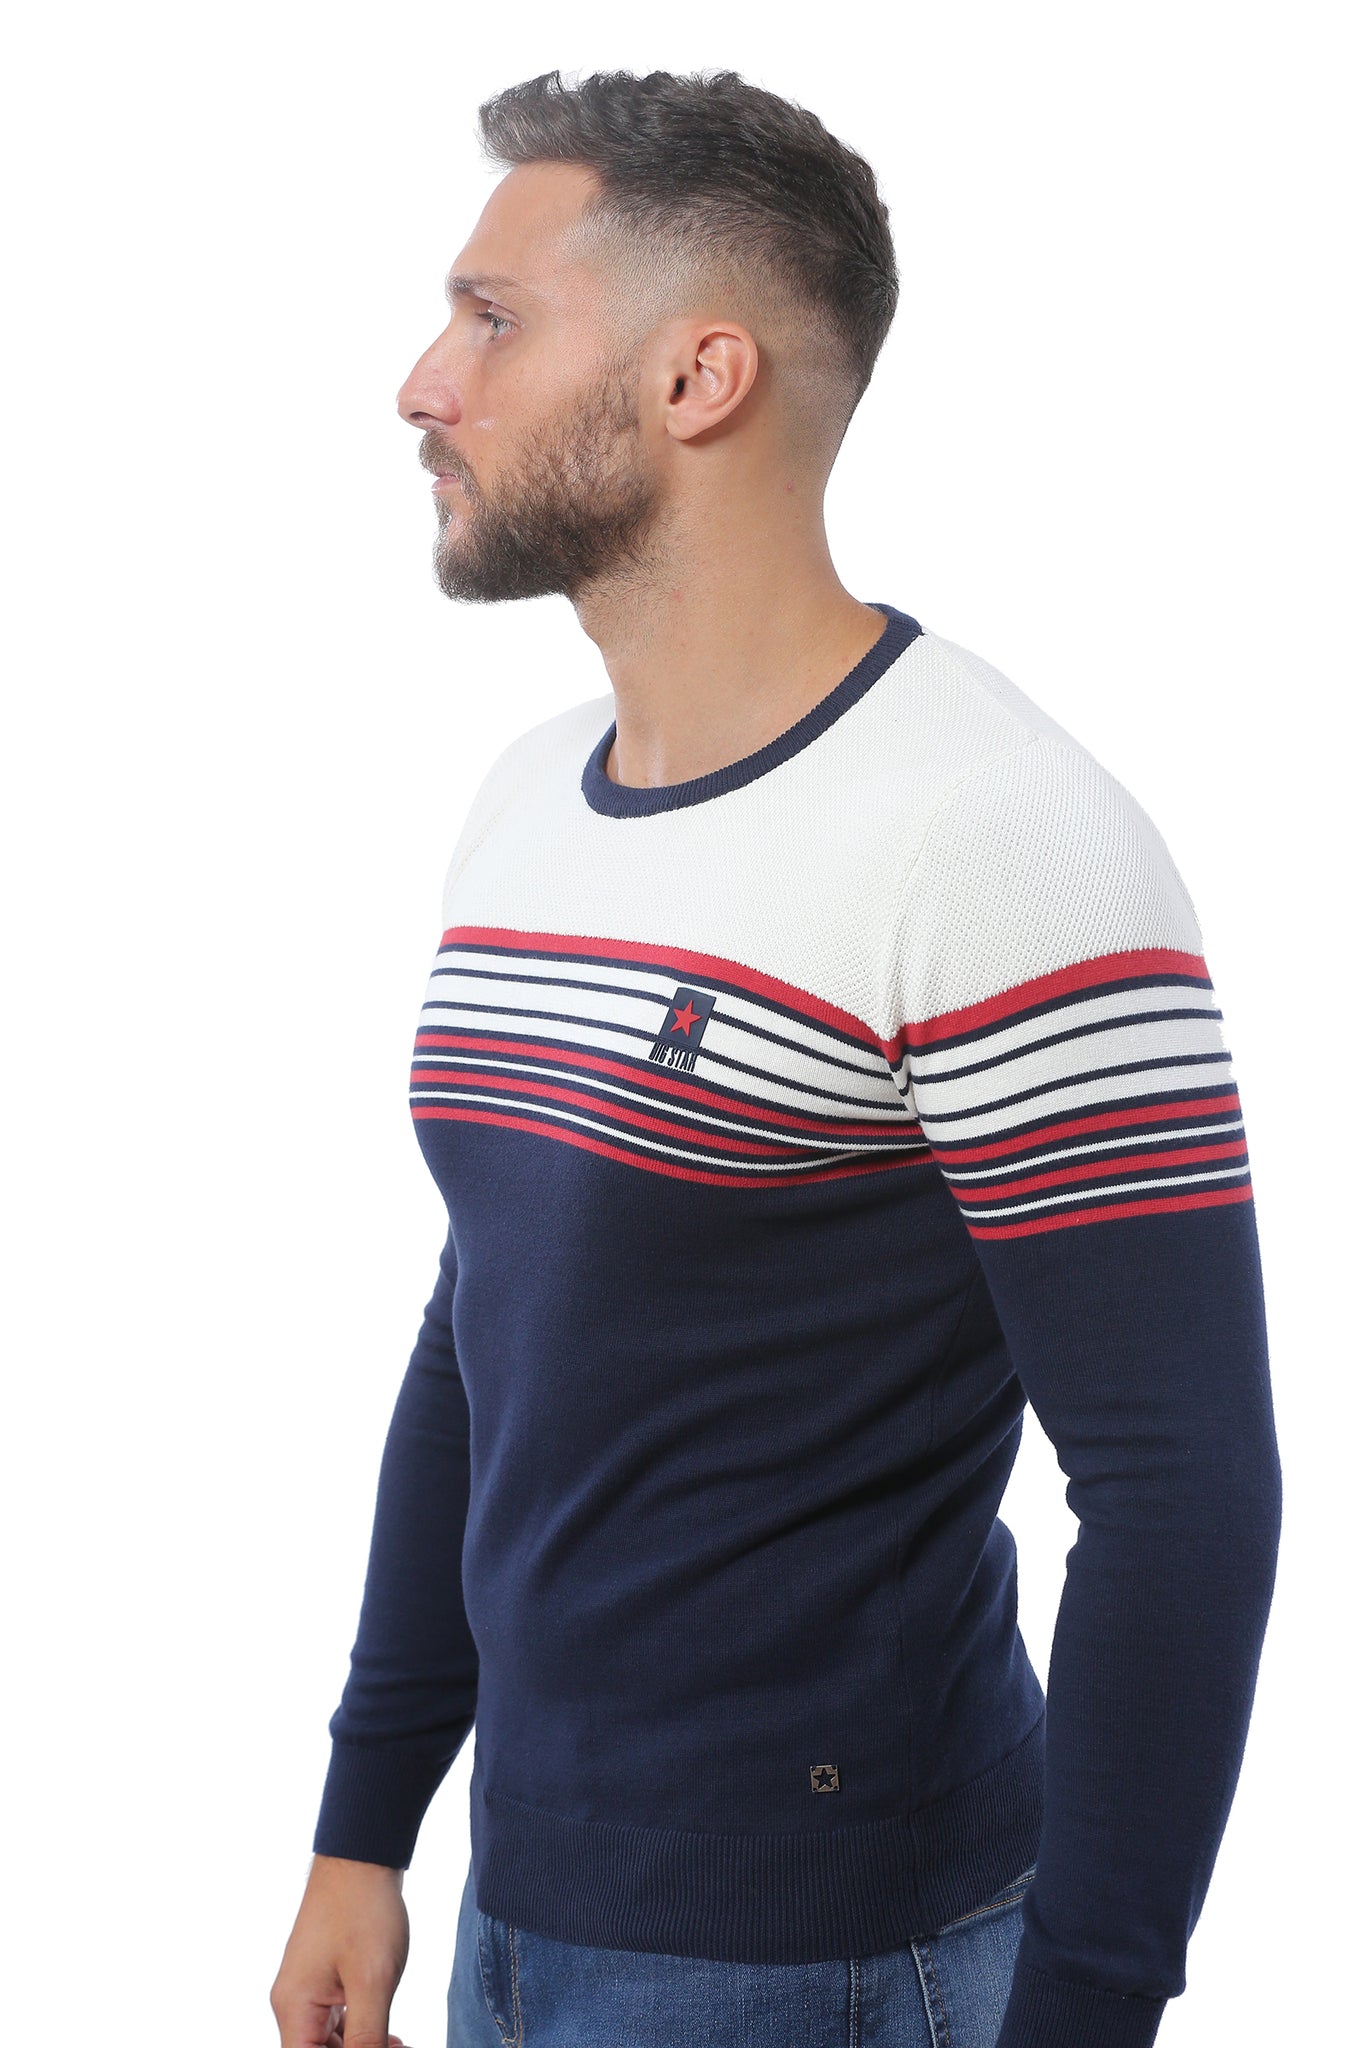 Sweater with Stripes | Dark Navy with White and Red